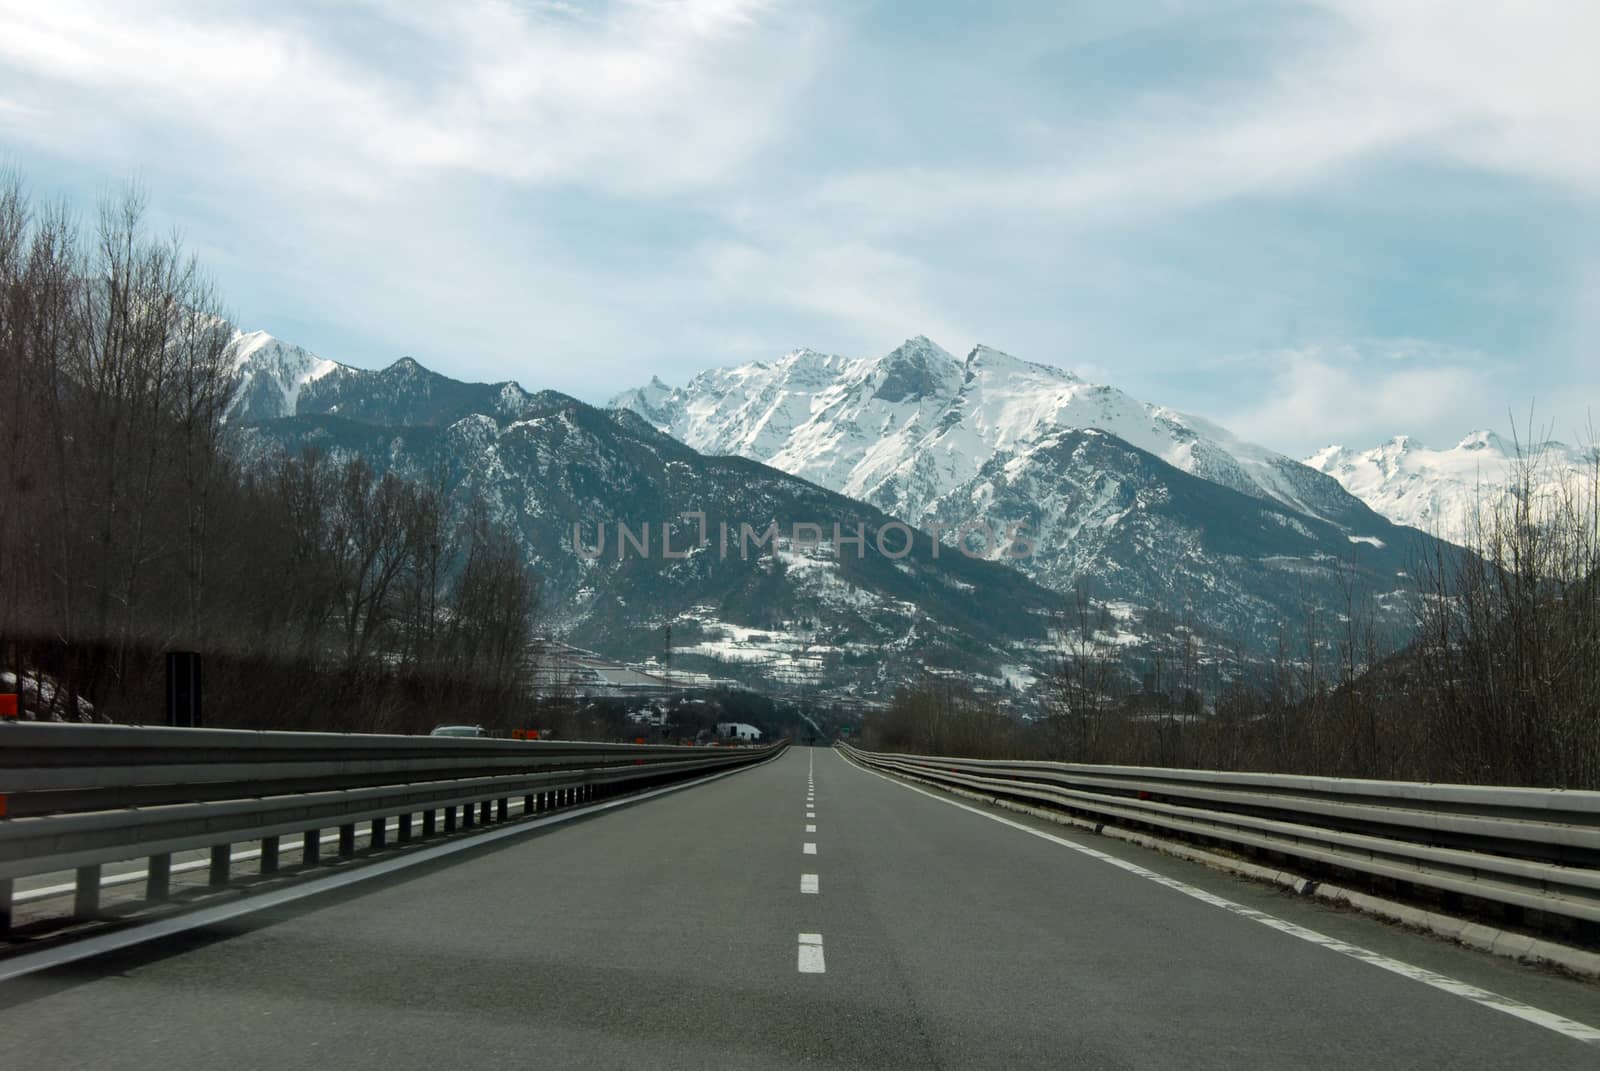 highway that leads to the high mountains by aselsa